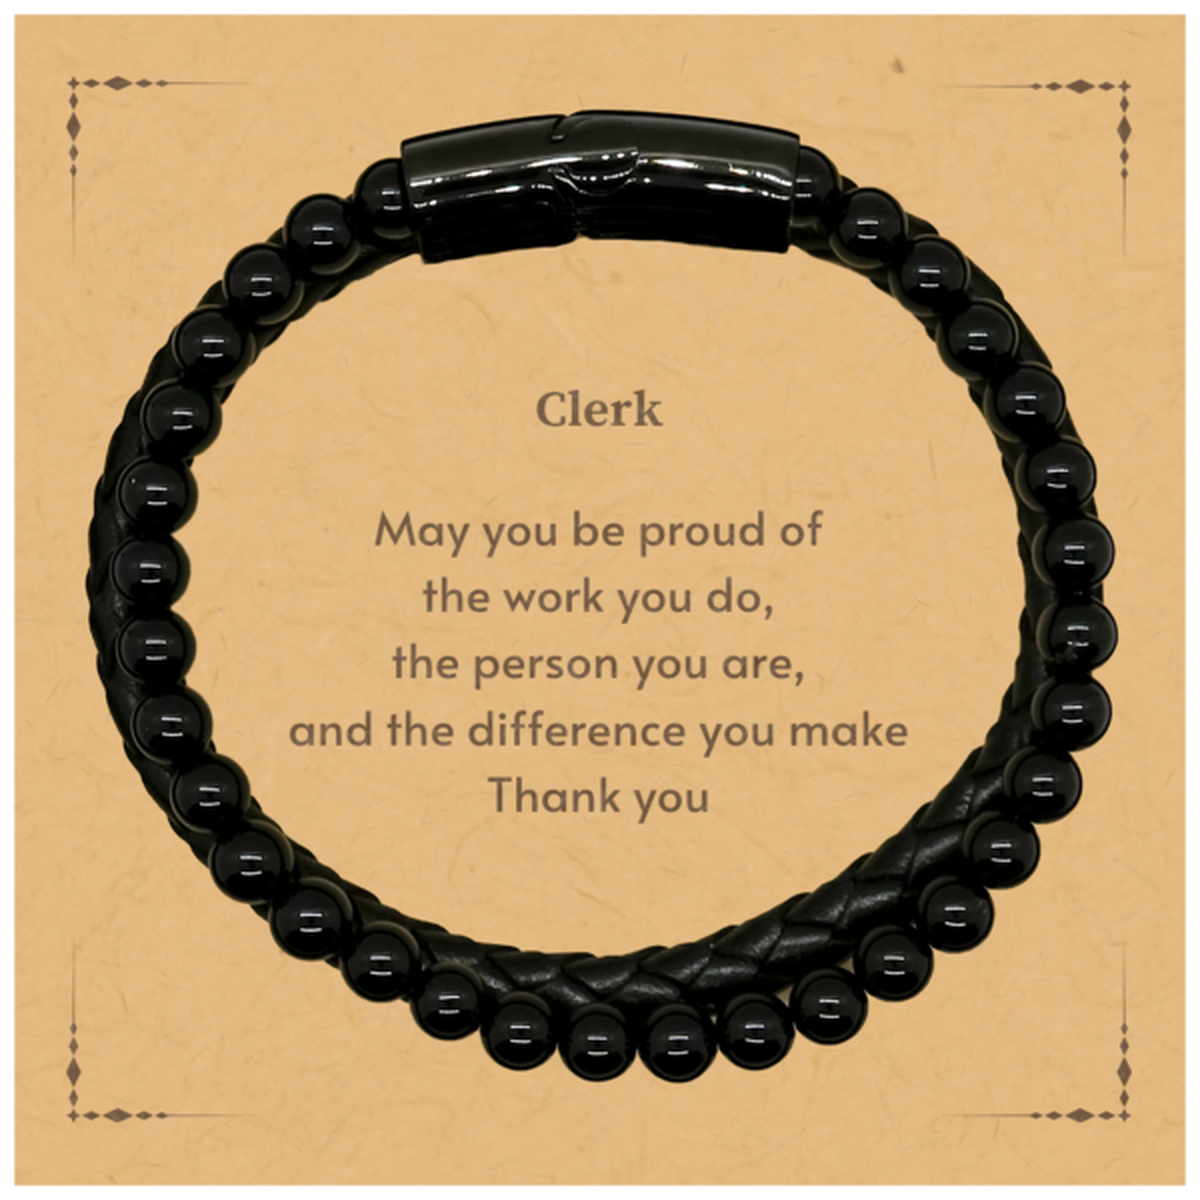 Heartwarming Stone Leather Bracelets Retirement Coworkers Gifts for Clerk, Clerk May You be proud of the work you do, the person you are Gifts for Boss Men Women Friends